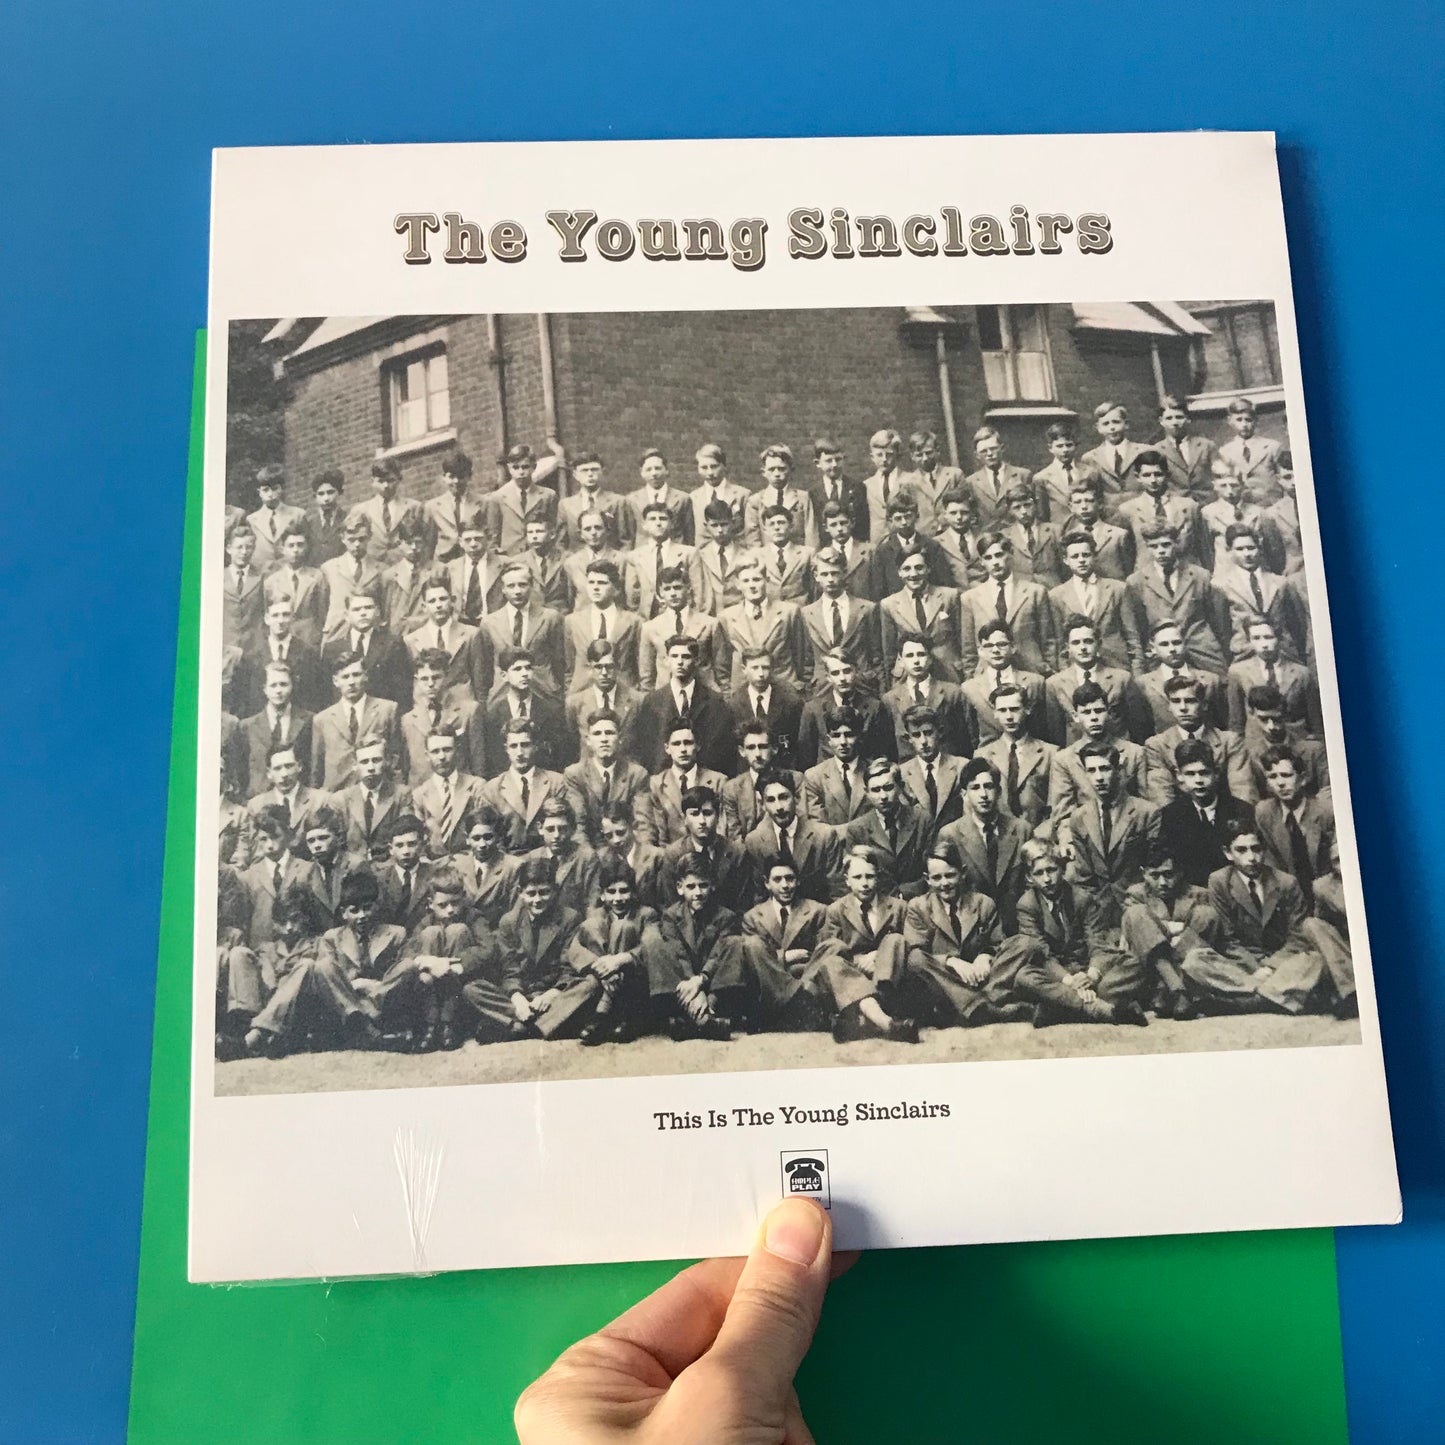 The Young Sinclairs 'This is the Young Sinclairs' – album